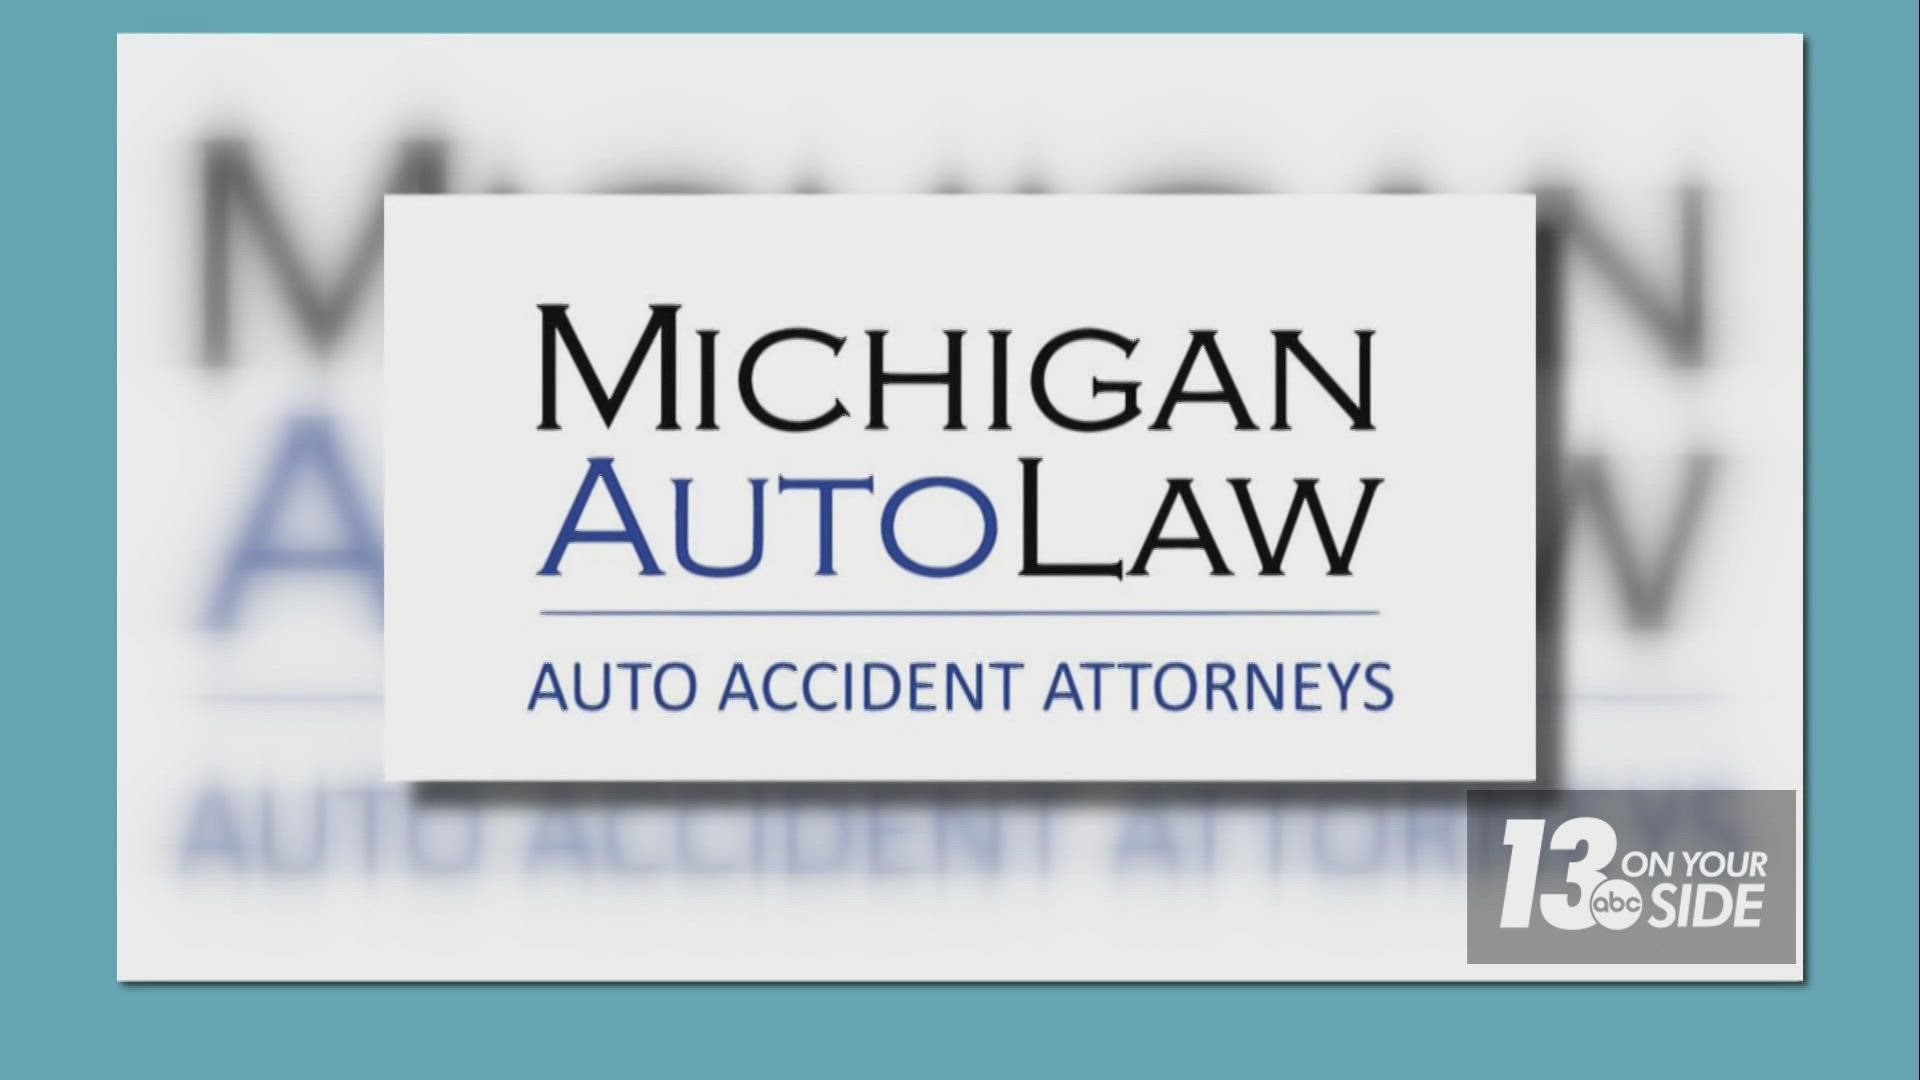 Attorney Brandon Hewitt joined us from Michigan Auto Law to answer our auto insurance questions.